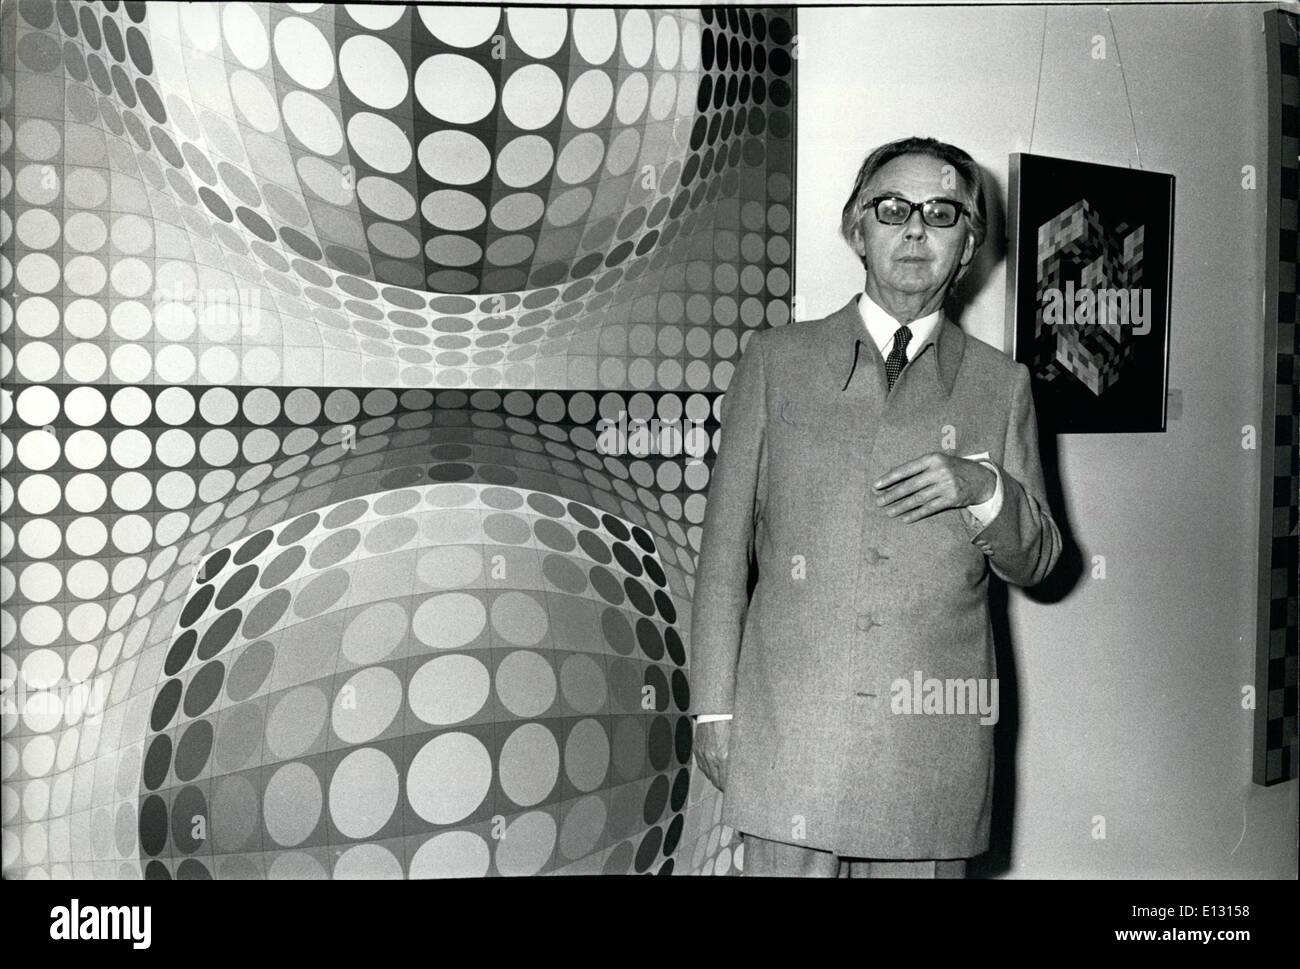 Feb. 26, 2012 - Inaugural Exhibit of the new Vasareley Center 1015 Madison Ave. NYC, 19 May '78. Painting, Collages and serigraphs by - Victor Vasarely, one of the world s foremost artists, was born in Hungary, and has lived in Paris since 1930. The father of Optical Art is represented world wide in major museums and collections. Among others, in the United States: Museum of Modern Art. New York, Solomon R. Guggenheim Art Museum. New York, Rockefeller Foundation. New York, Buffalo Museum, Pittsburg Museum of Art, Joseph Hirshorn Foundation, Jewish Museum Stock Photo